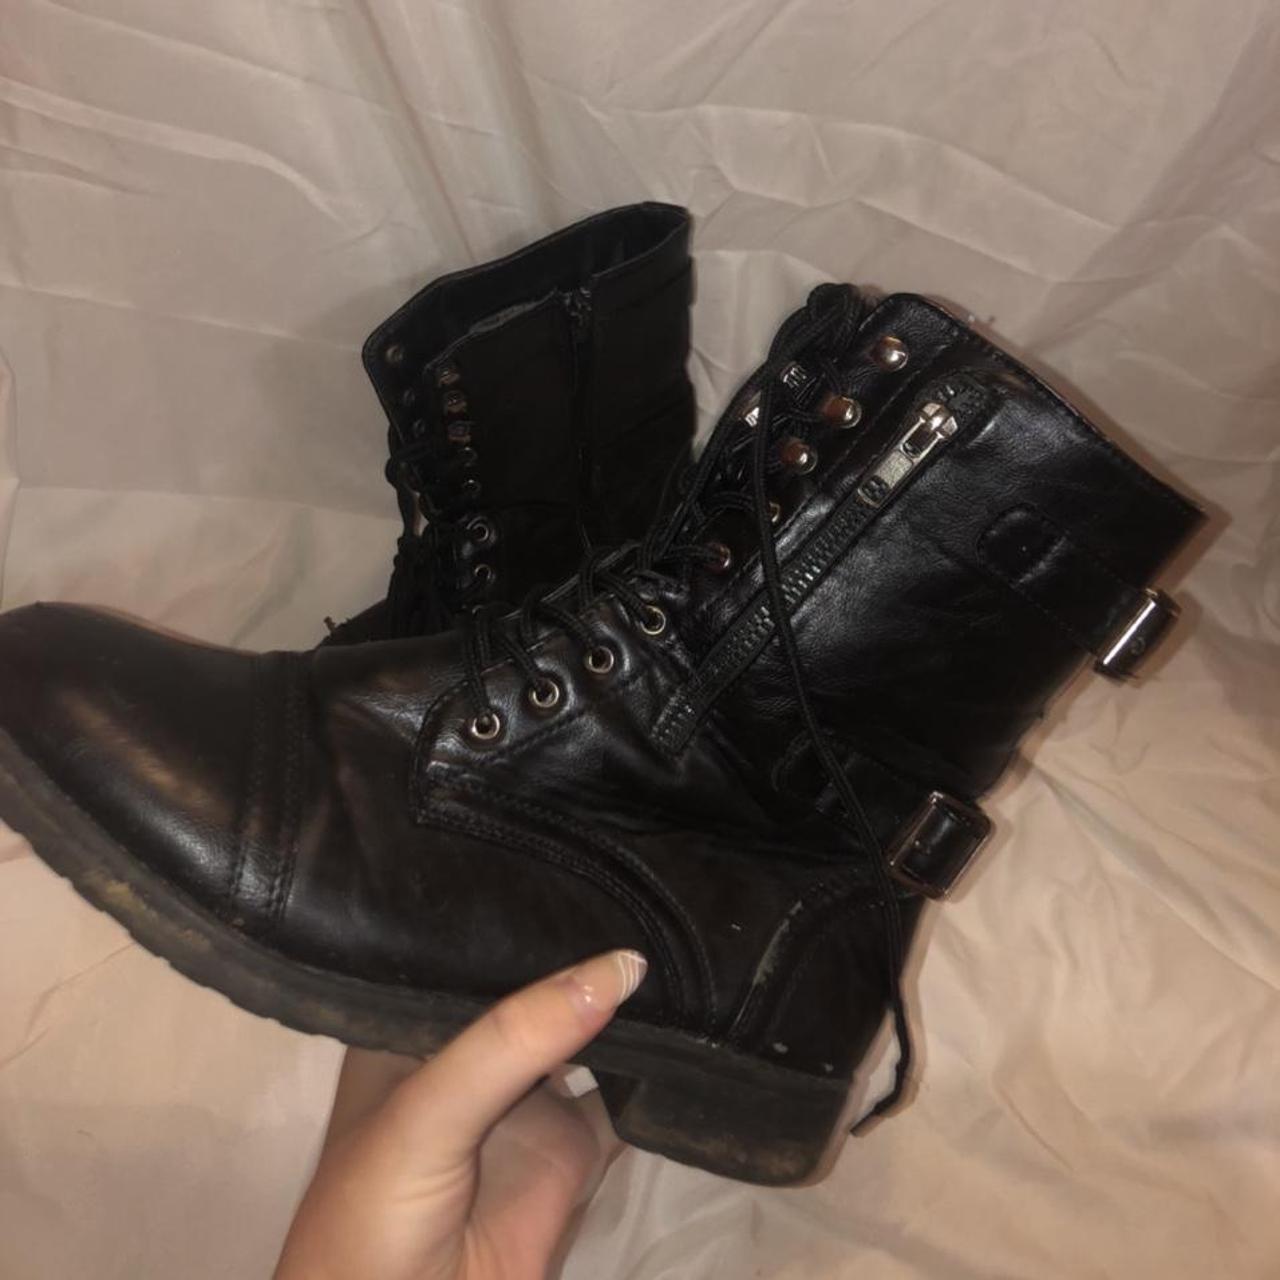 Product Image 1 - black combat boots will clean